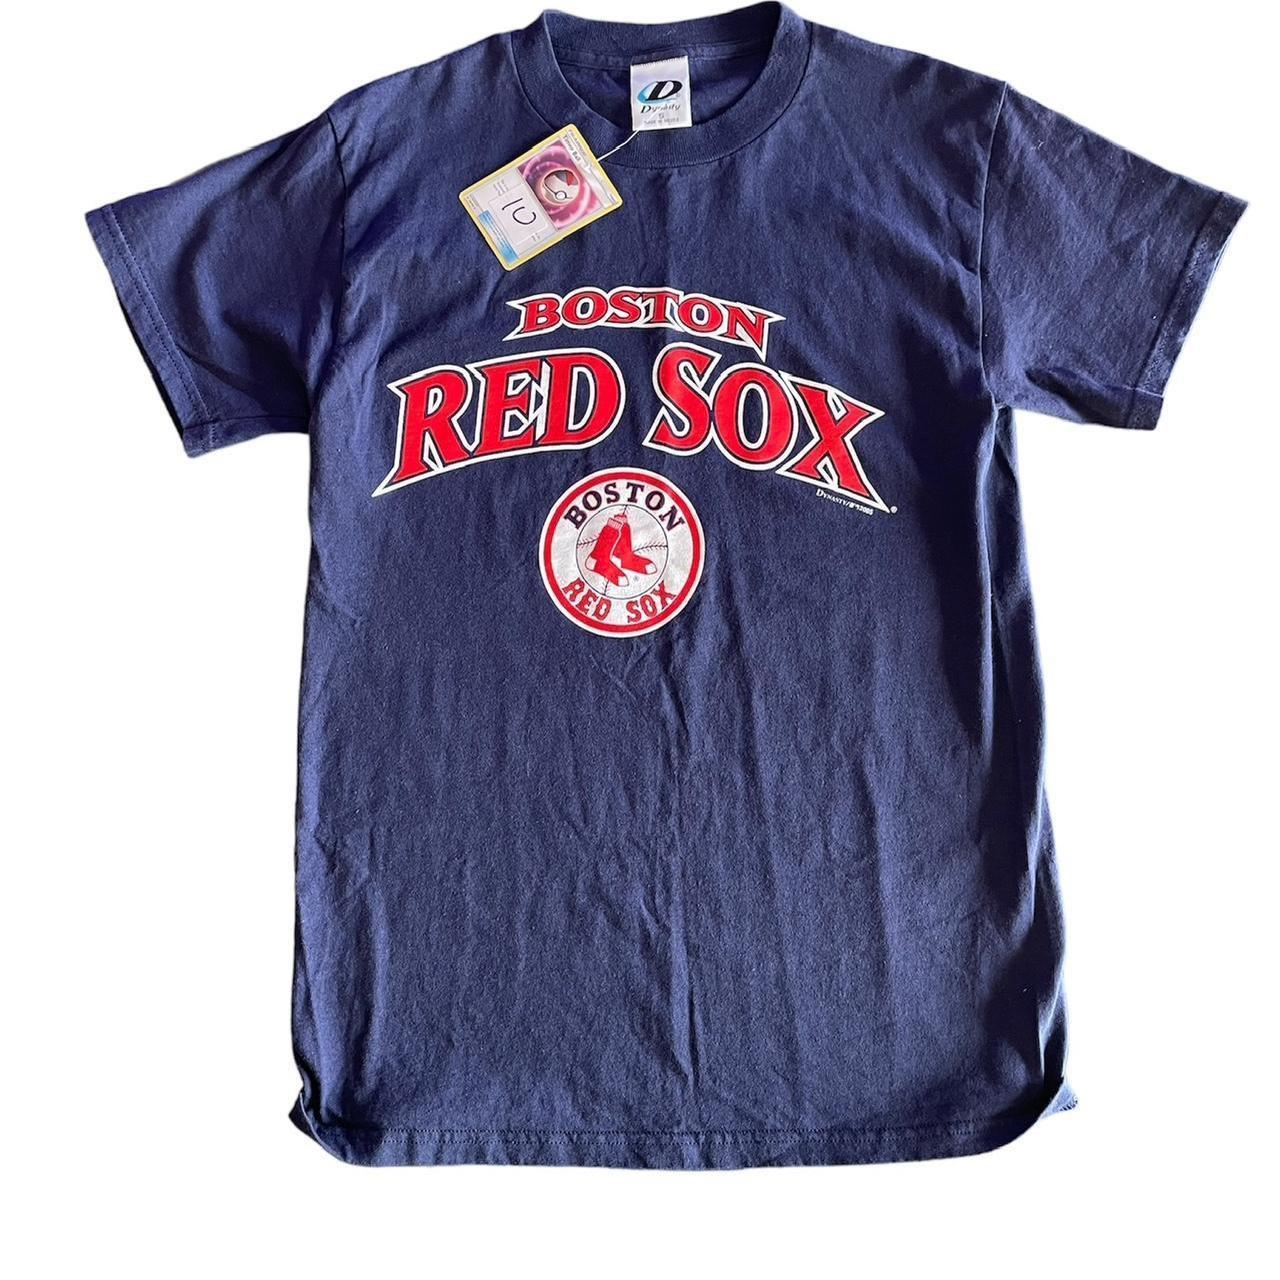 Retro '05 Dynasty Pink Boston Red Sox Tee Size M In - Depop